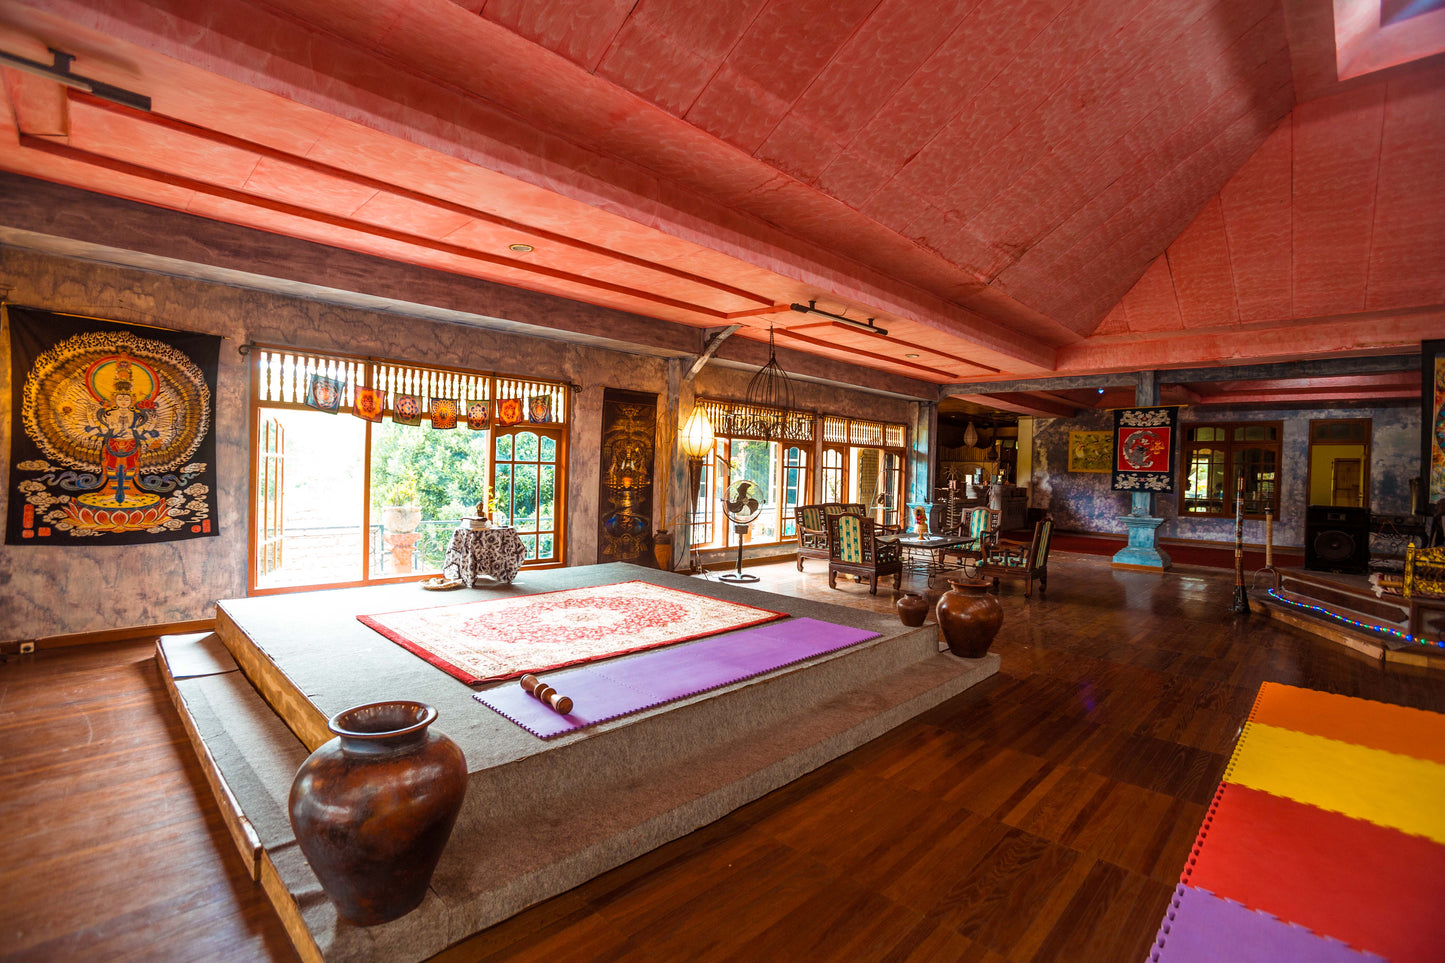 Couples Private bedroom - 2 Person - 1 Week - Bali Flow Temple - Living rooms with Daily Classes